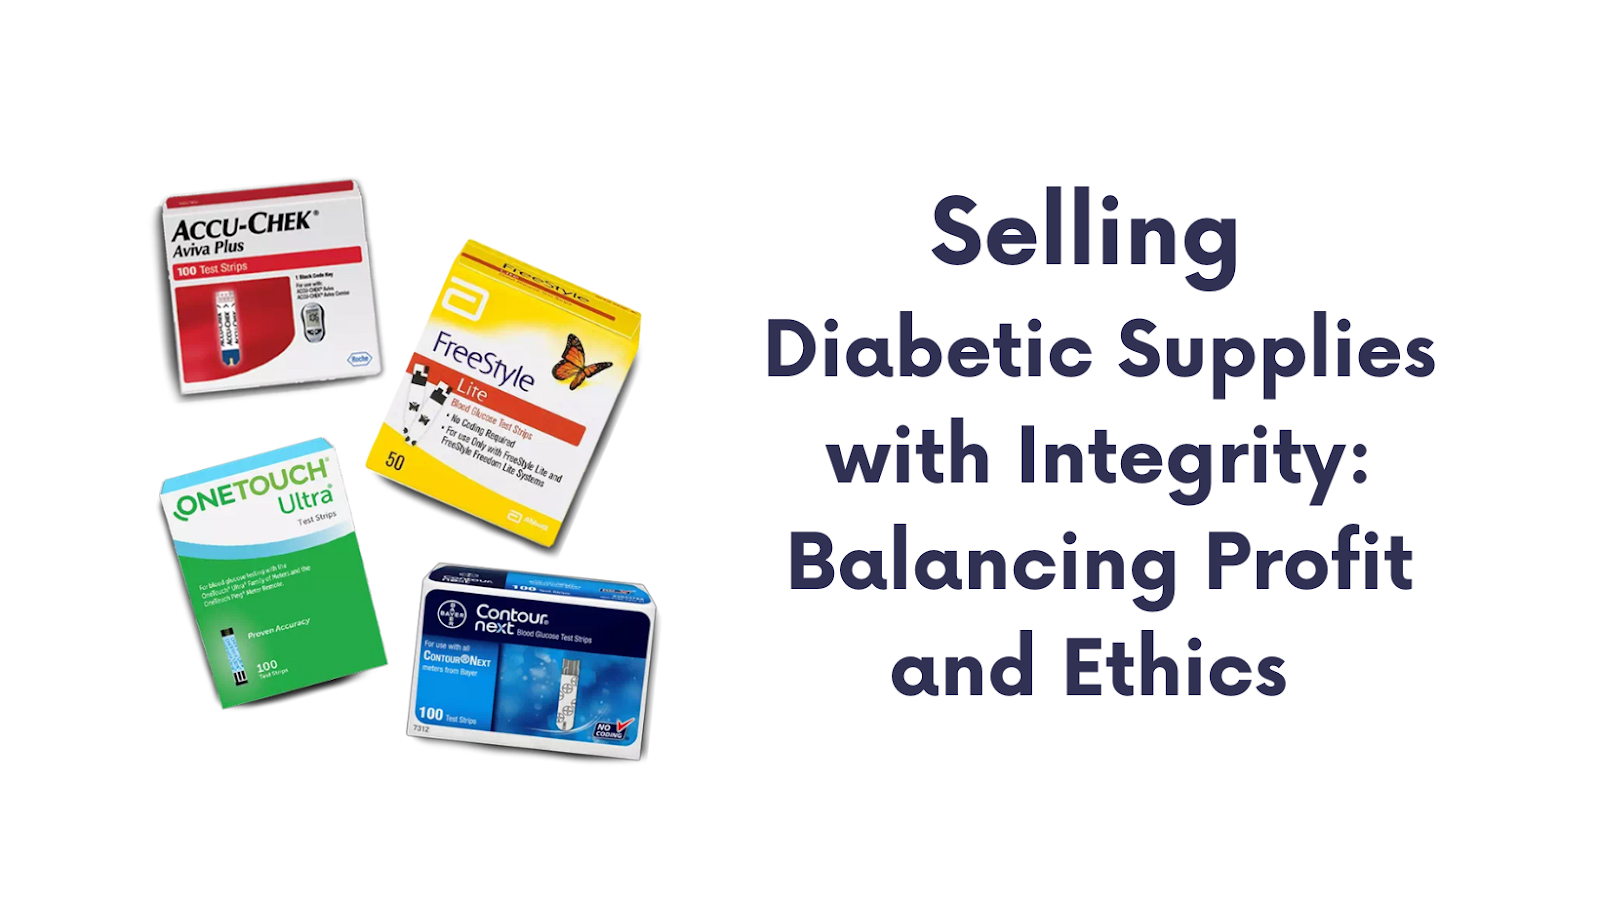 Selling Diabetic Supplies with Integrity: Balancing Profit and Ethics